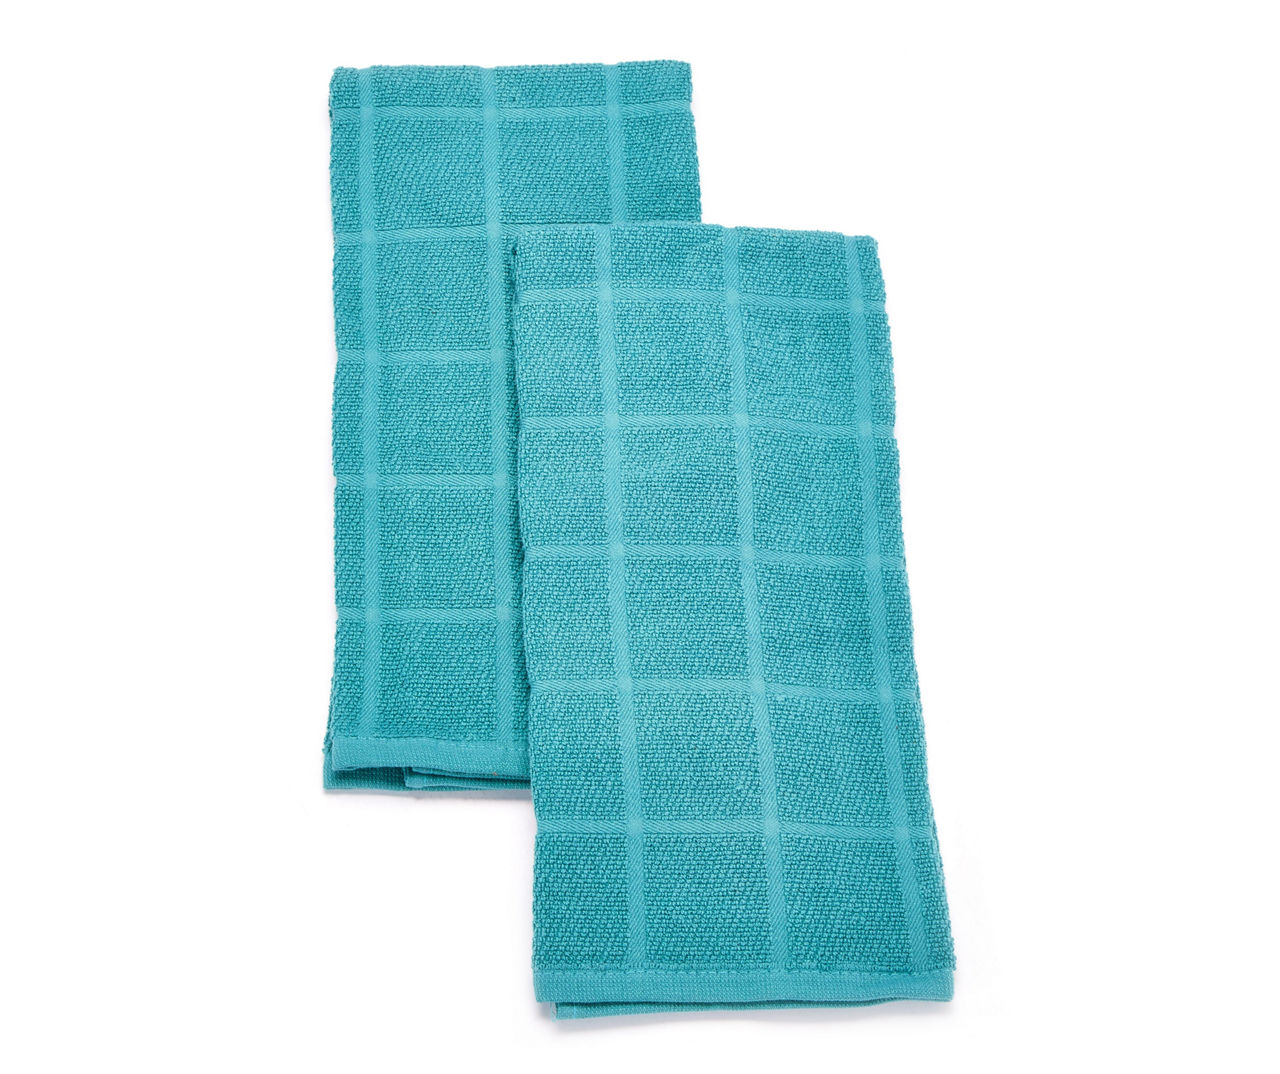 Our Table Solid Kitchen Towels in Teal Set of 2 - Each